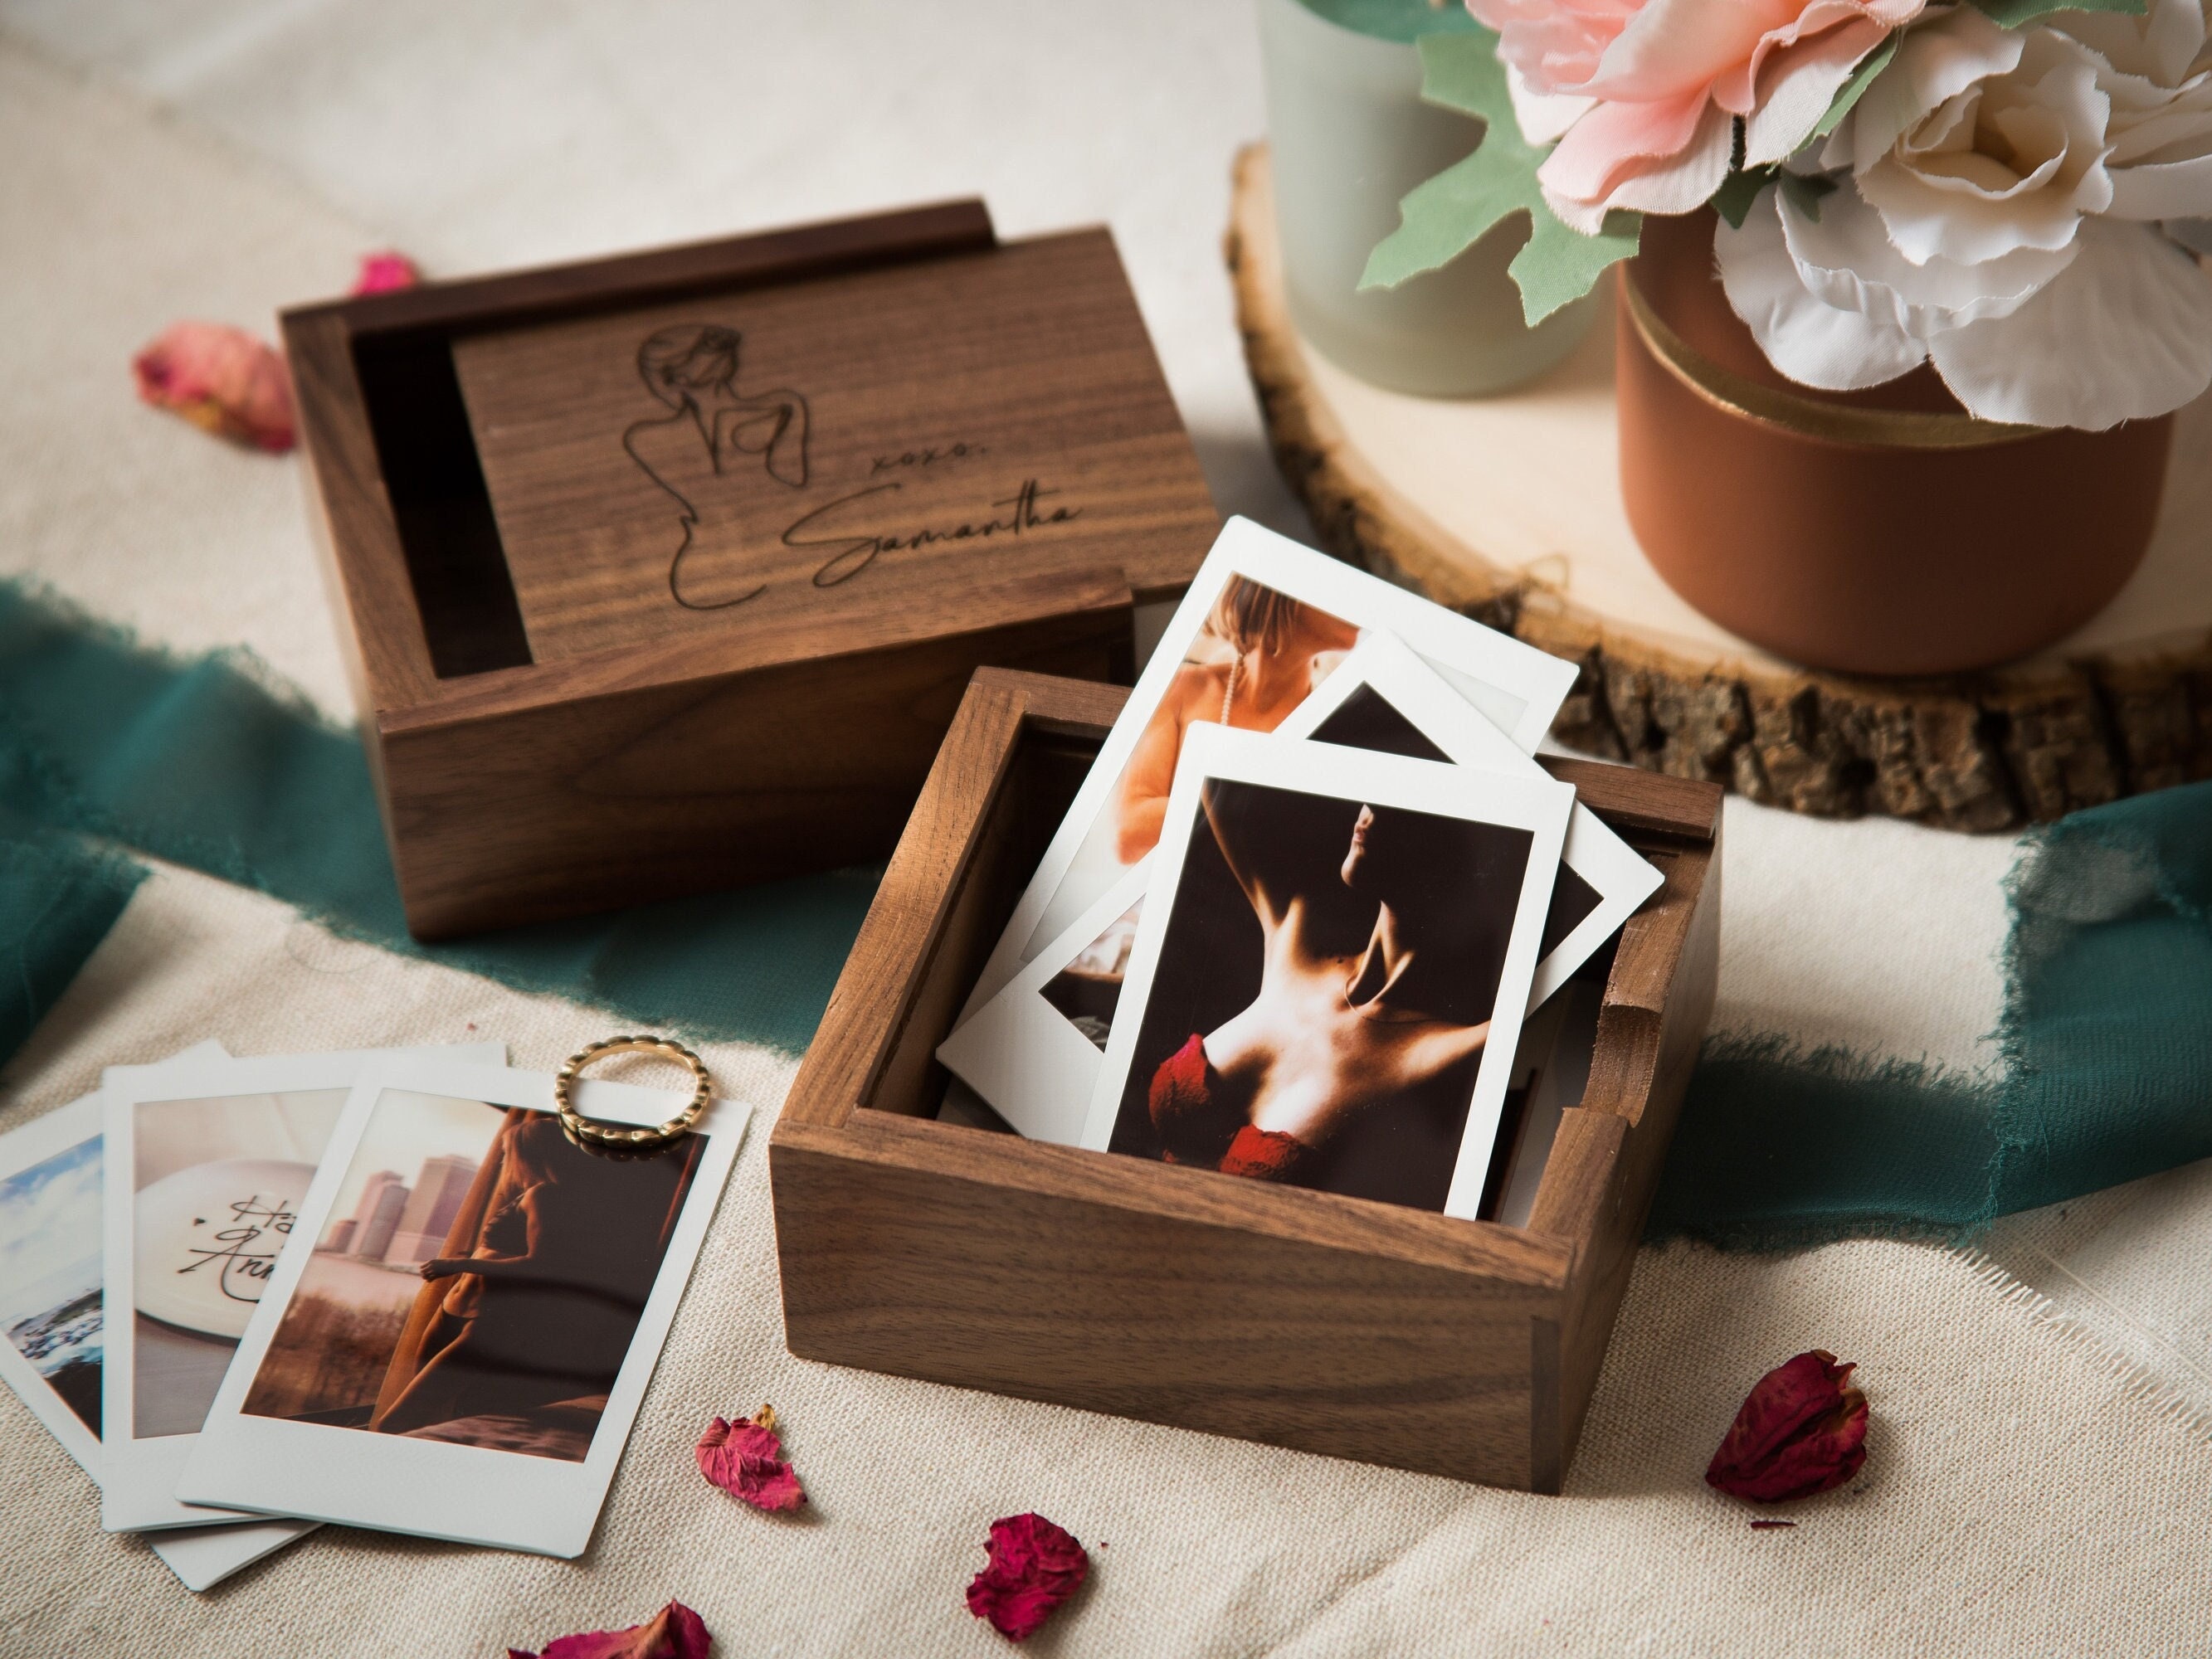 5x7 Wood Photo Memory Box Wedding Photography Storage, Keepsake Box for  Family Pictures, Custom Chocolate Gift Box for Valentine's Day 